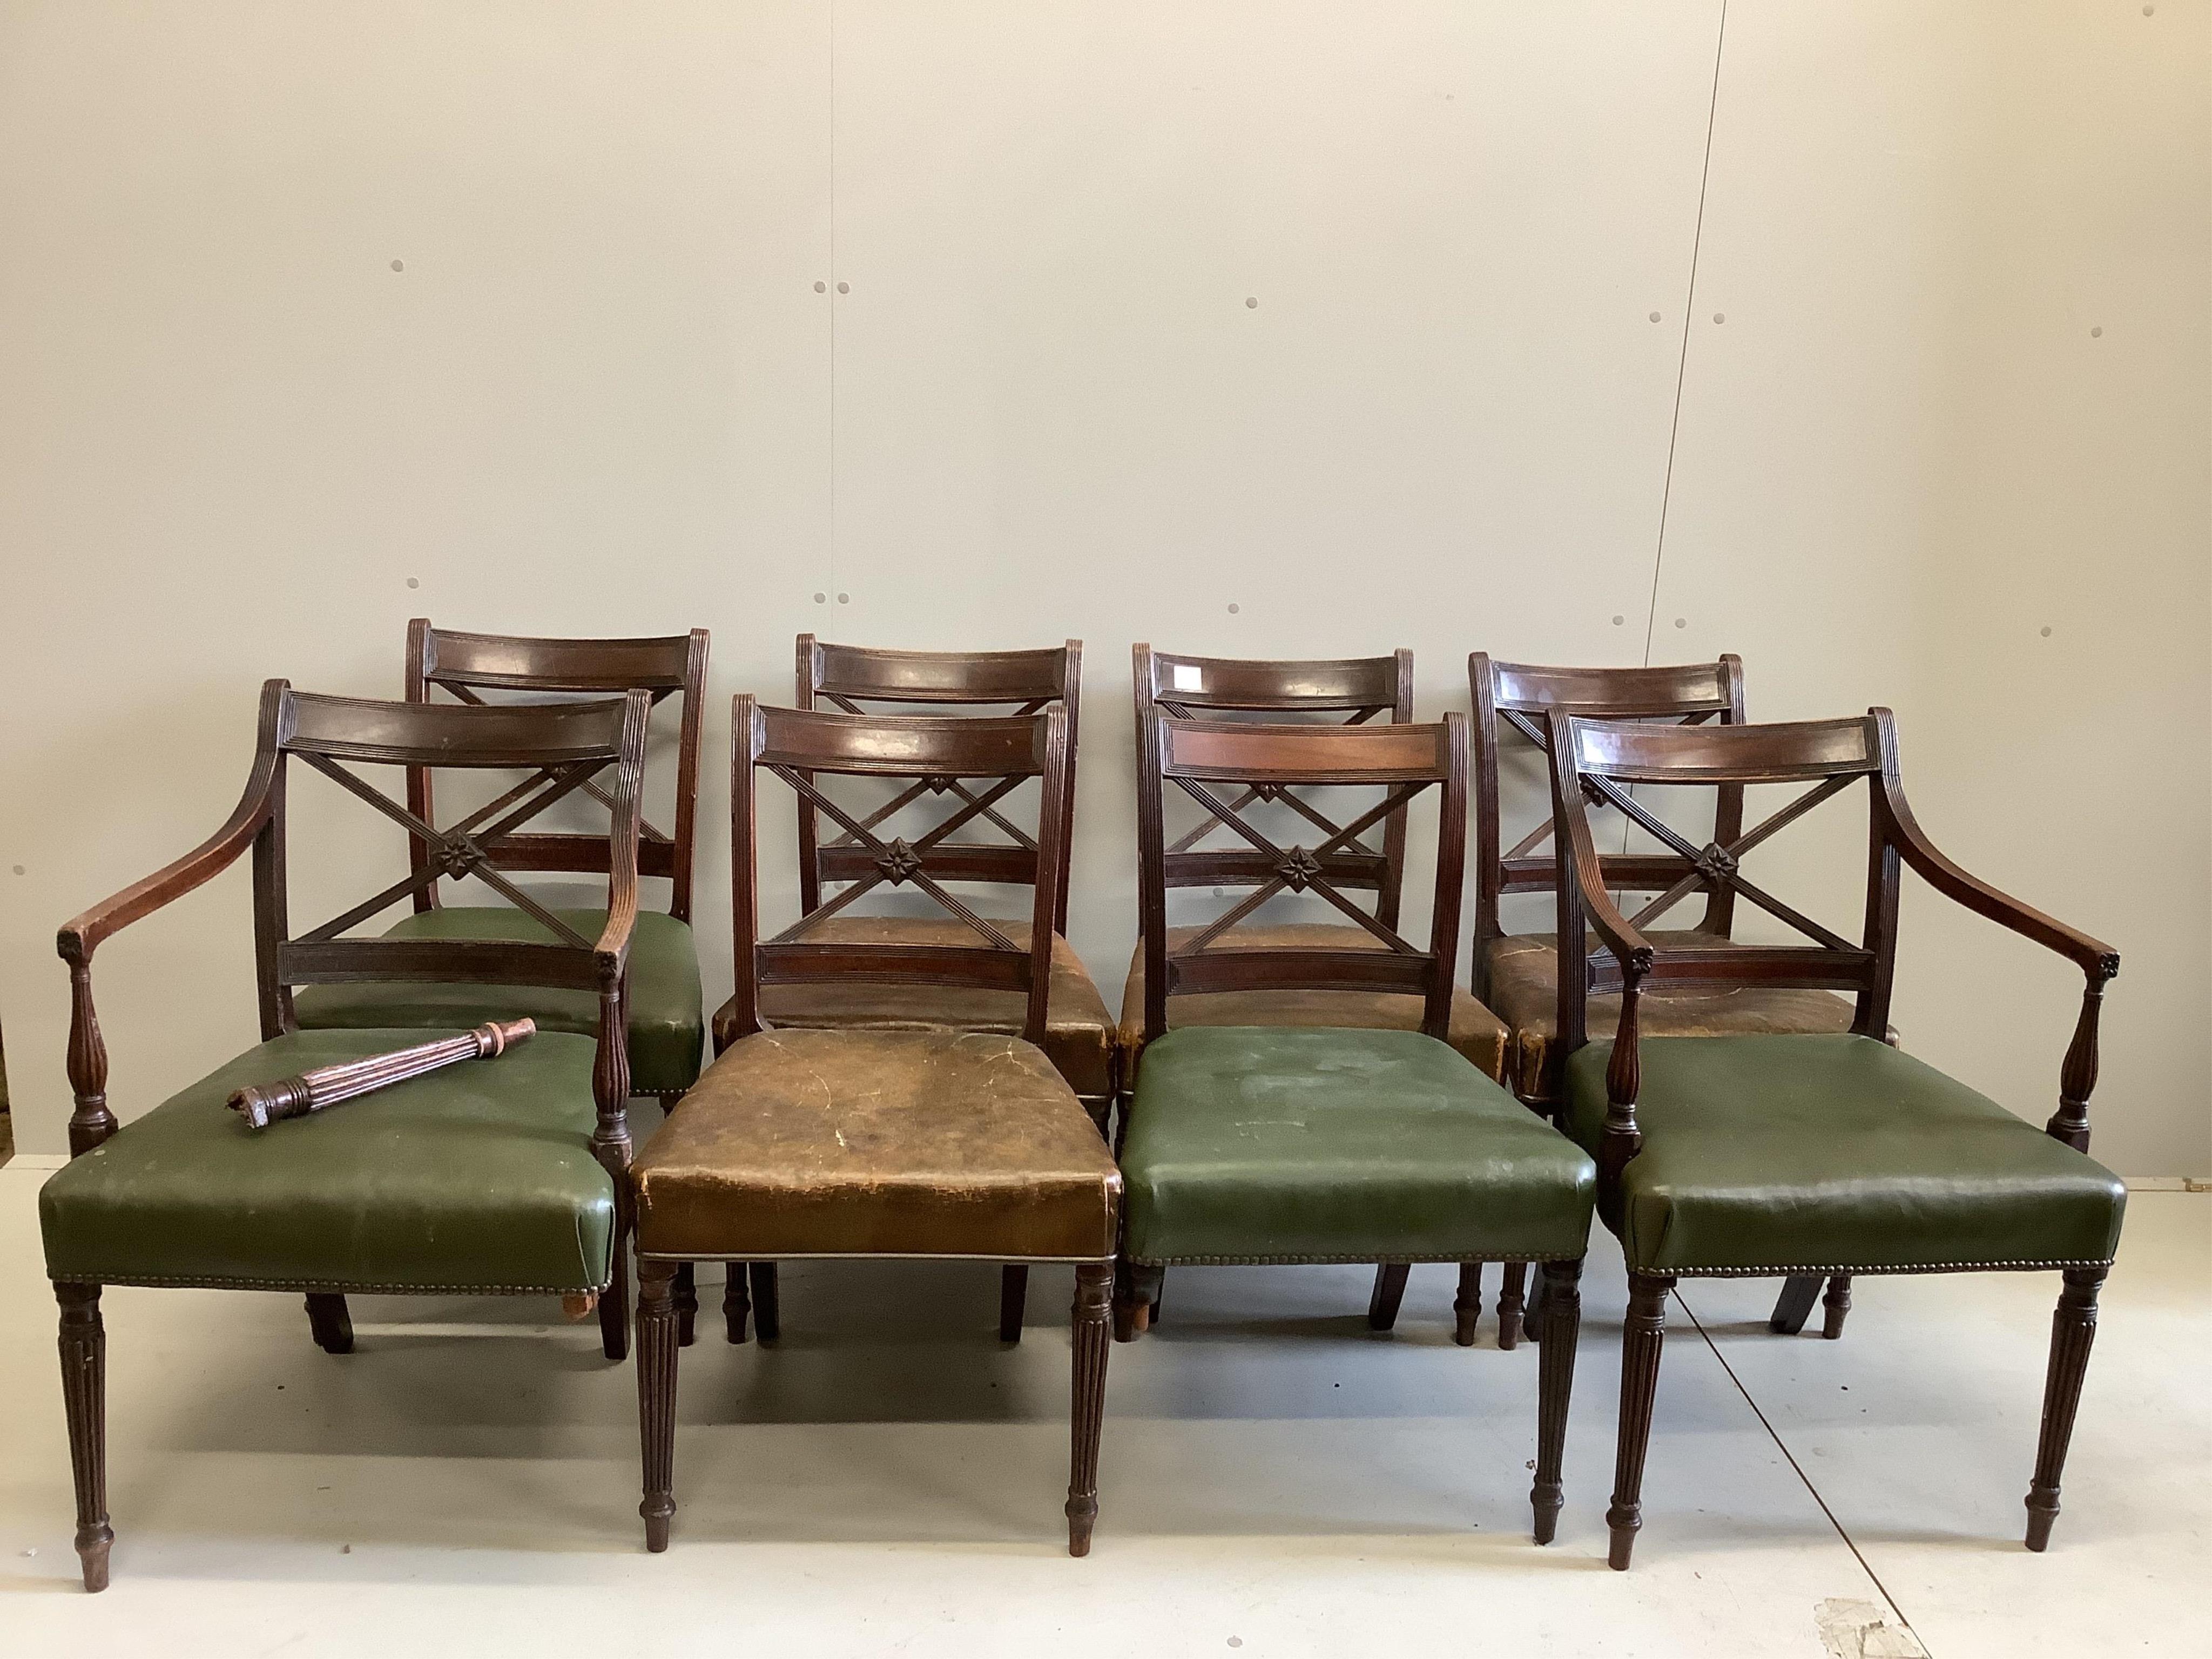 A set of eight George III mahogany 'X' back dining chairs (six single, two arm). Condition - poor, two a.f., one leg missing